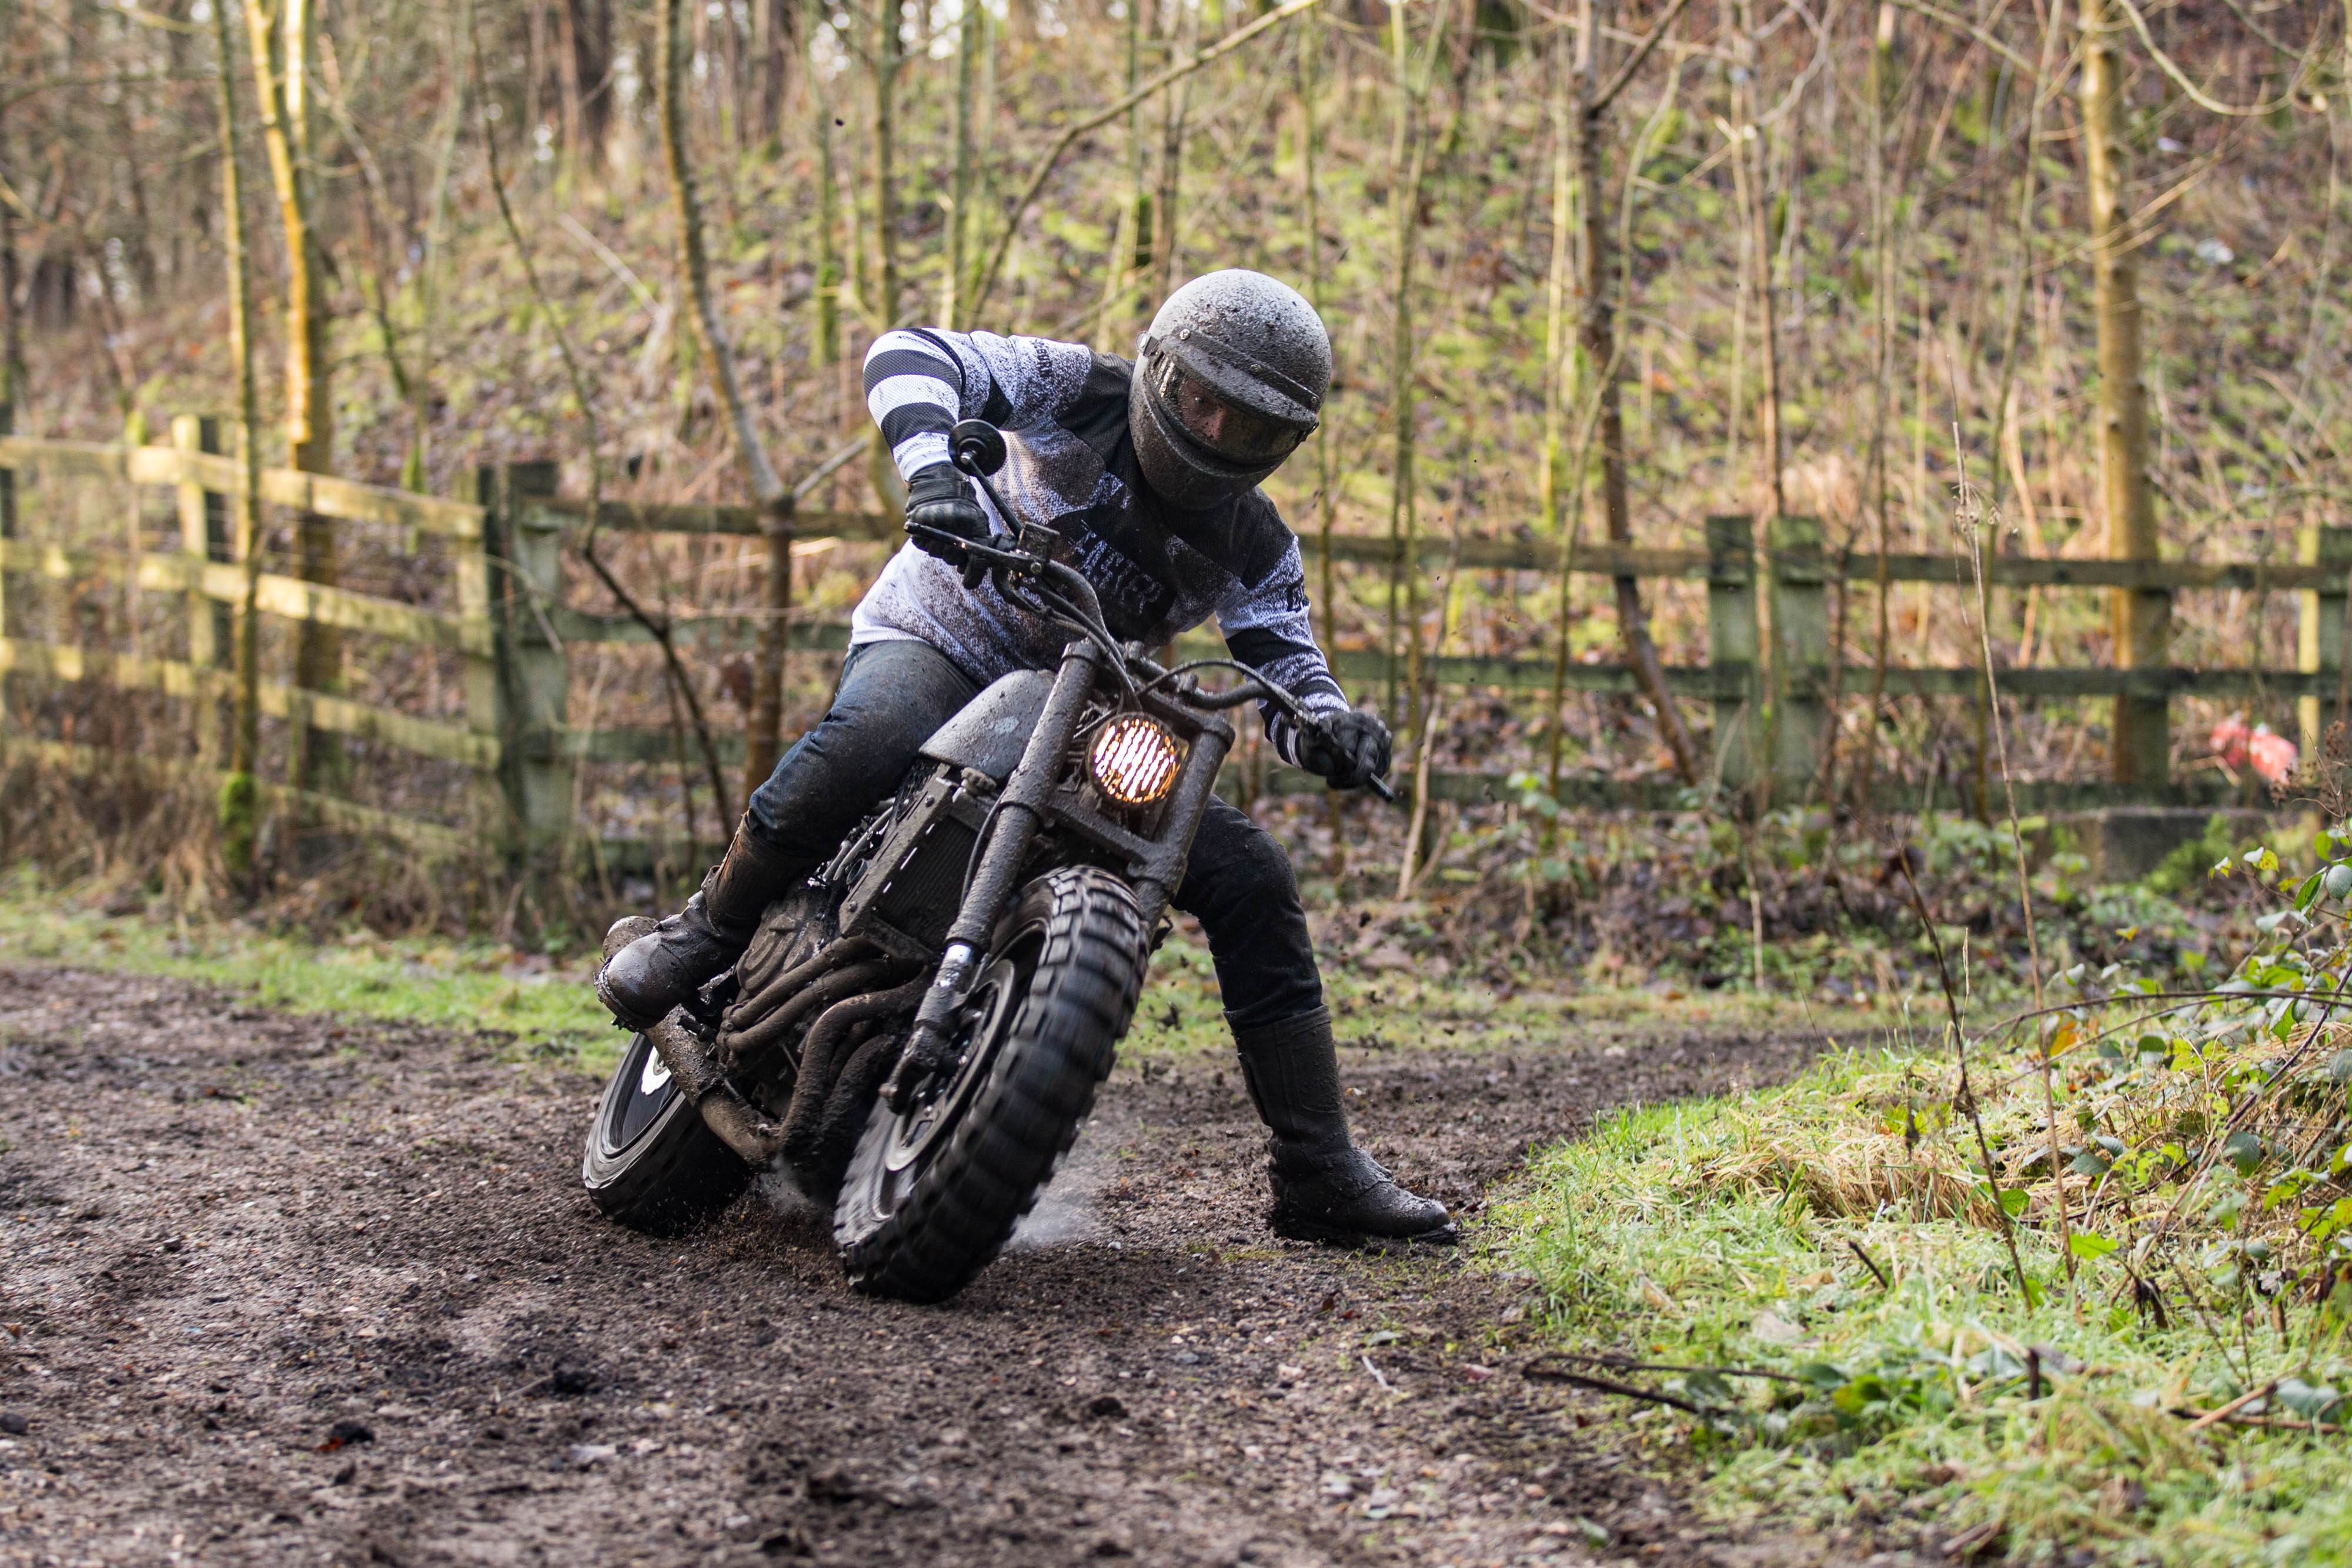 Rough crafts XSR700 scrambler in action